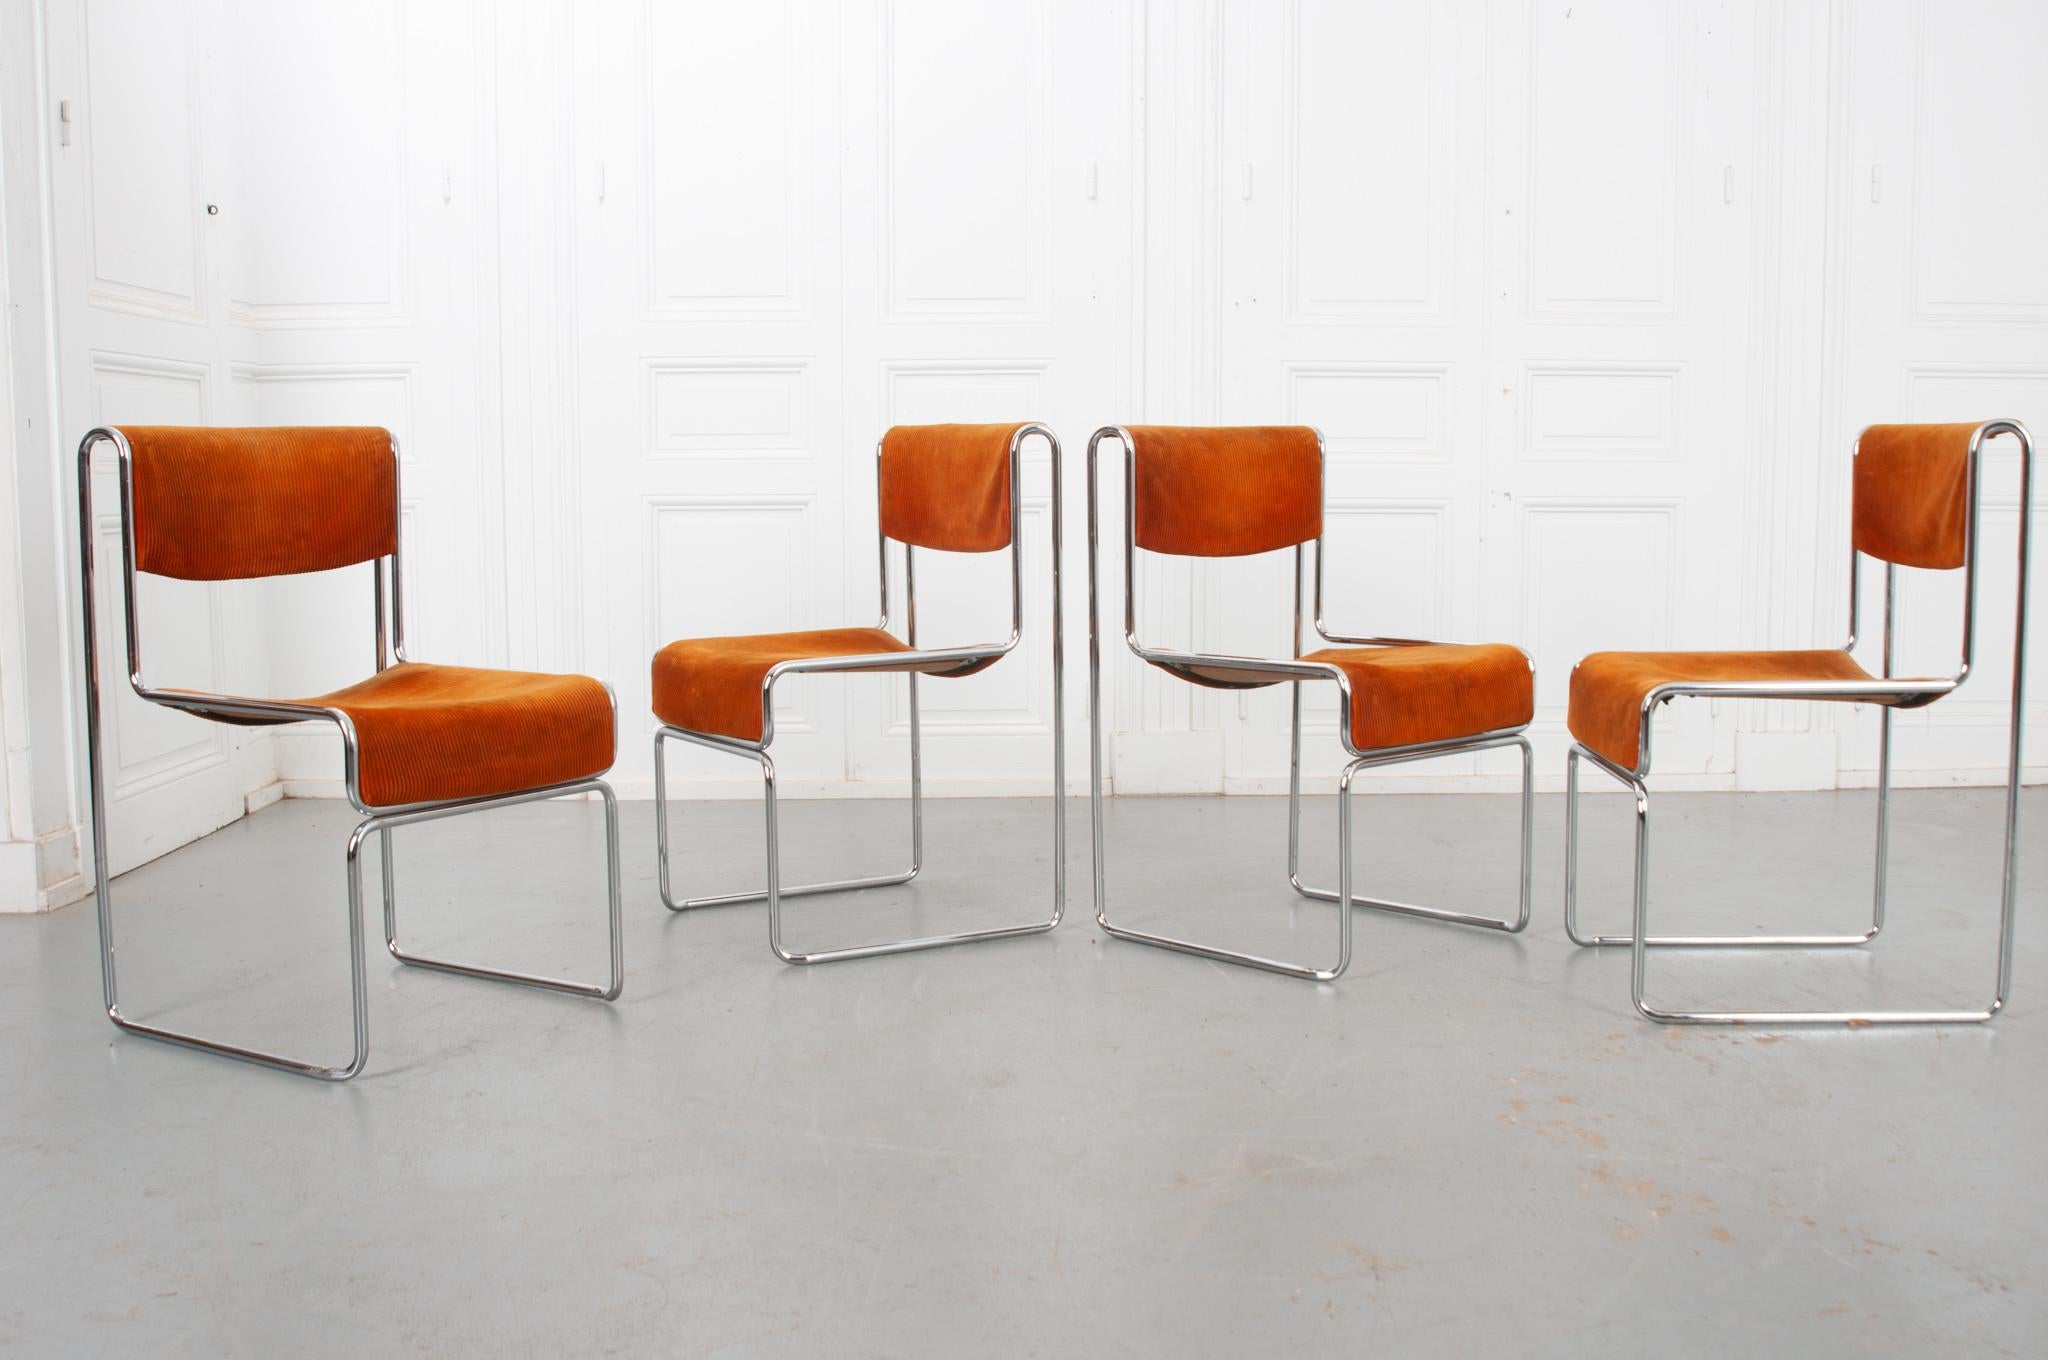 Bring your dining experience into the 20th Century with this outstanding set of 4 German chrome and upholstered dining chairs. The chairs have a tubular, chrome-plated frame, which has been bent into their iconic cube form. Their minimalist style